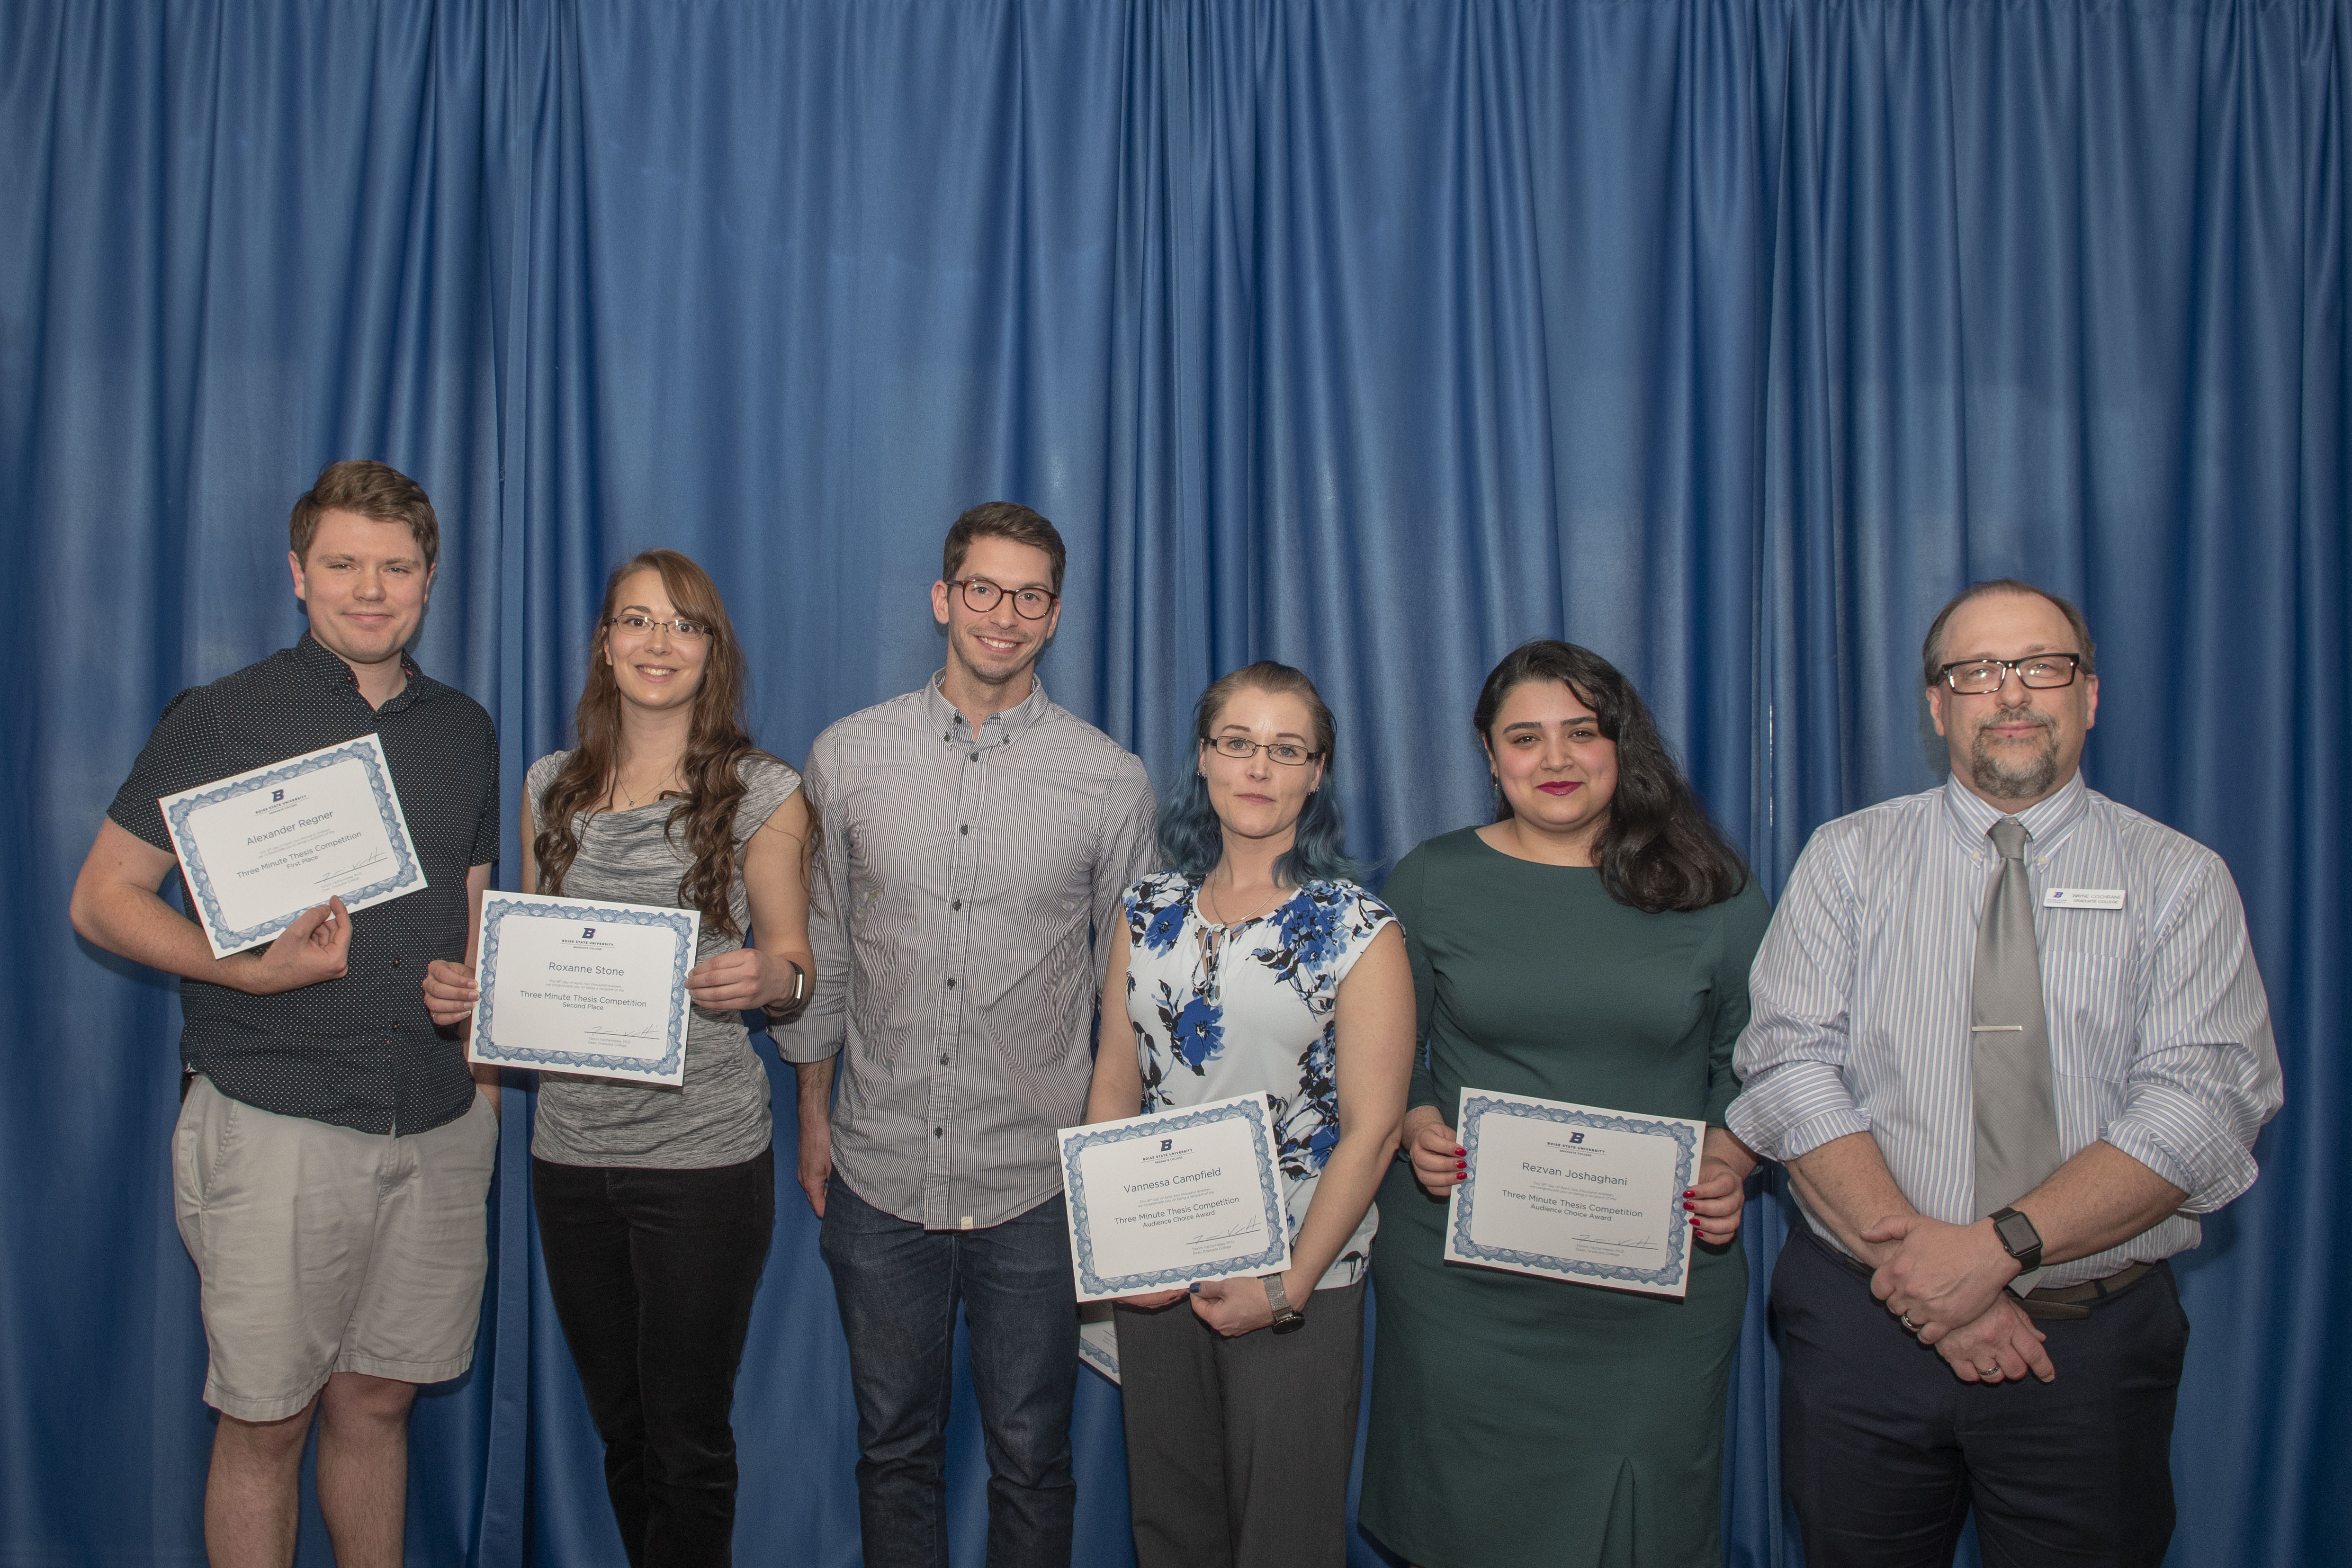 2019 three minute thesis award winners with awards